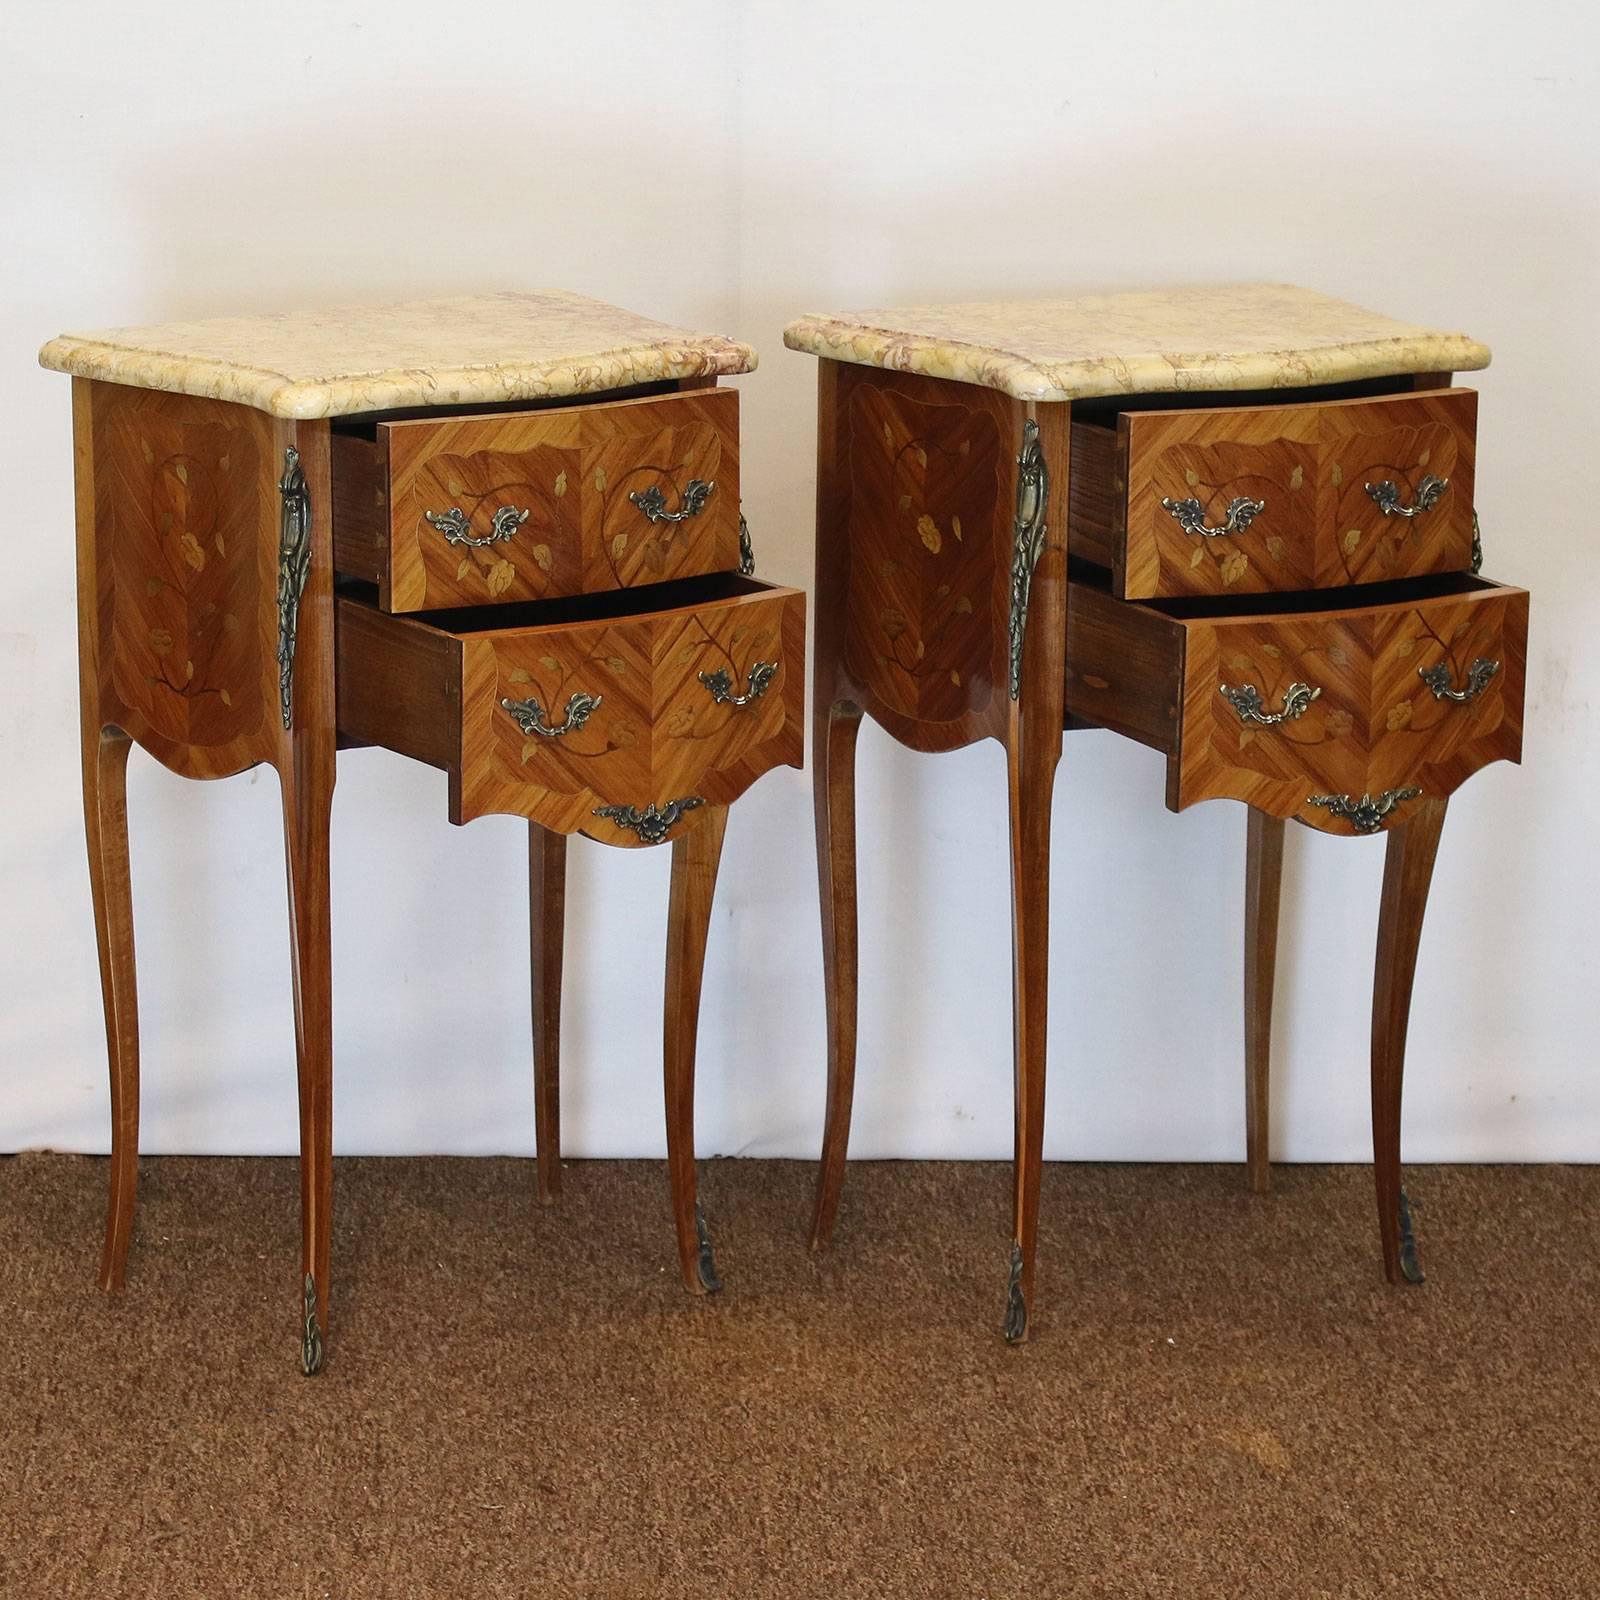 An elegant pair of matching bedside tables with marble tops. These bedside tables have two working drawers and are finished with decorative fruitwood inlay work. These bedside table are part of a set with code D1 and code D2.